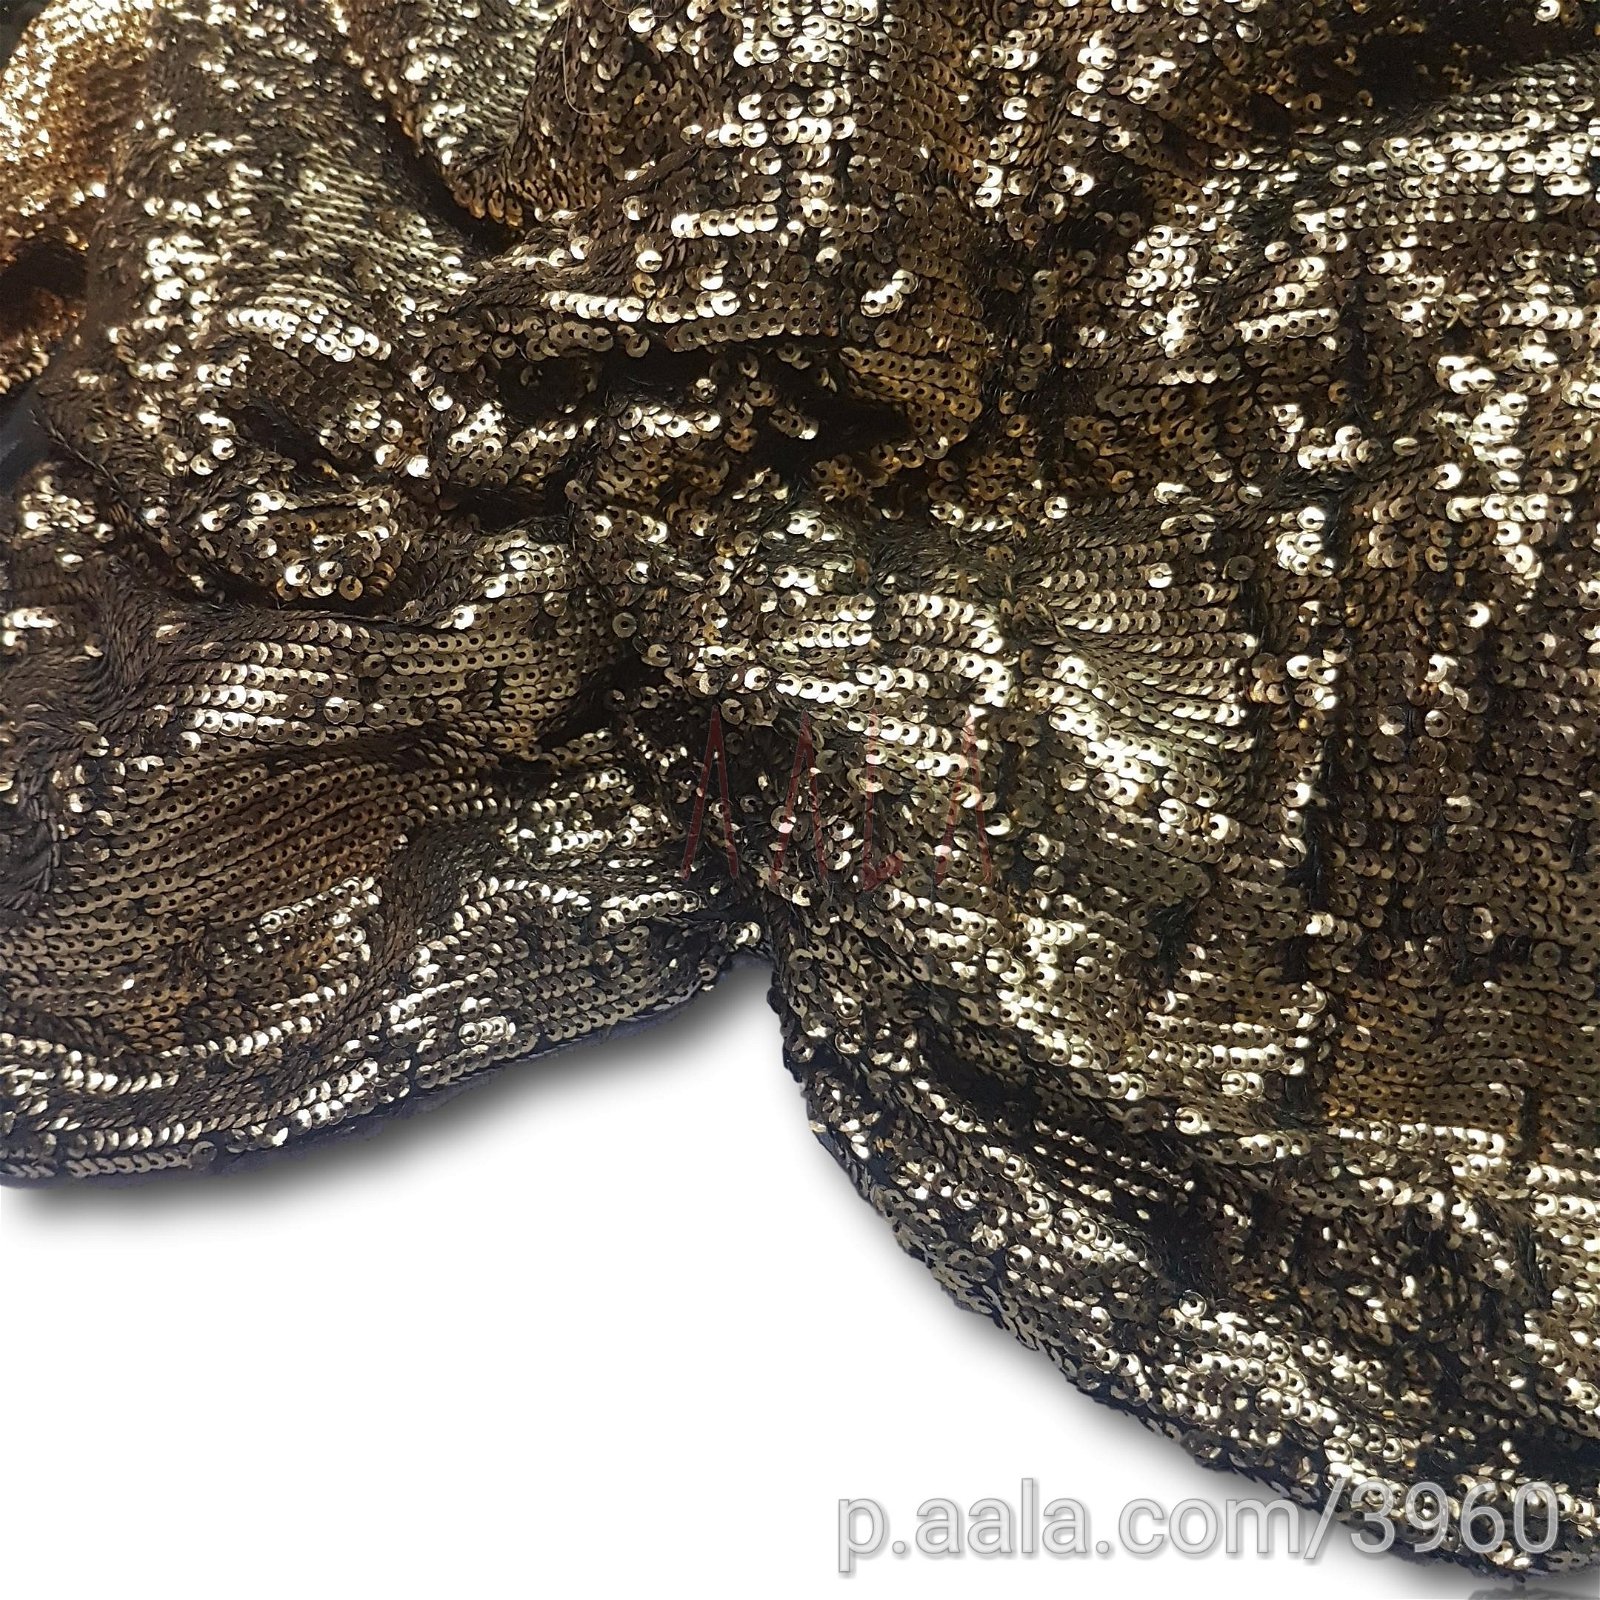 Zara Sequins Georgette Poly-ester 44 Inches Dyed Per Metre #3960